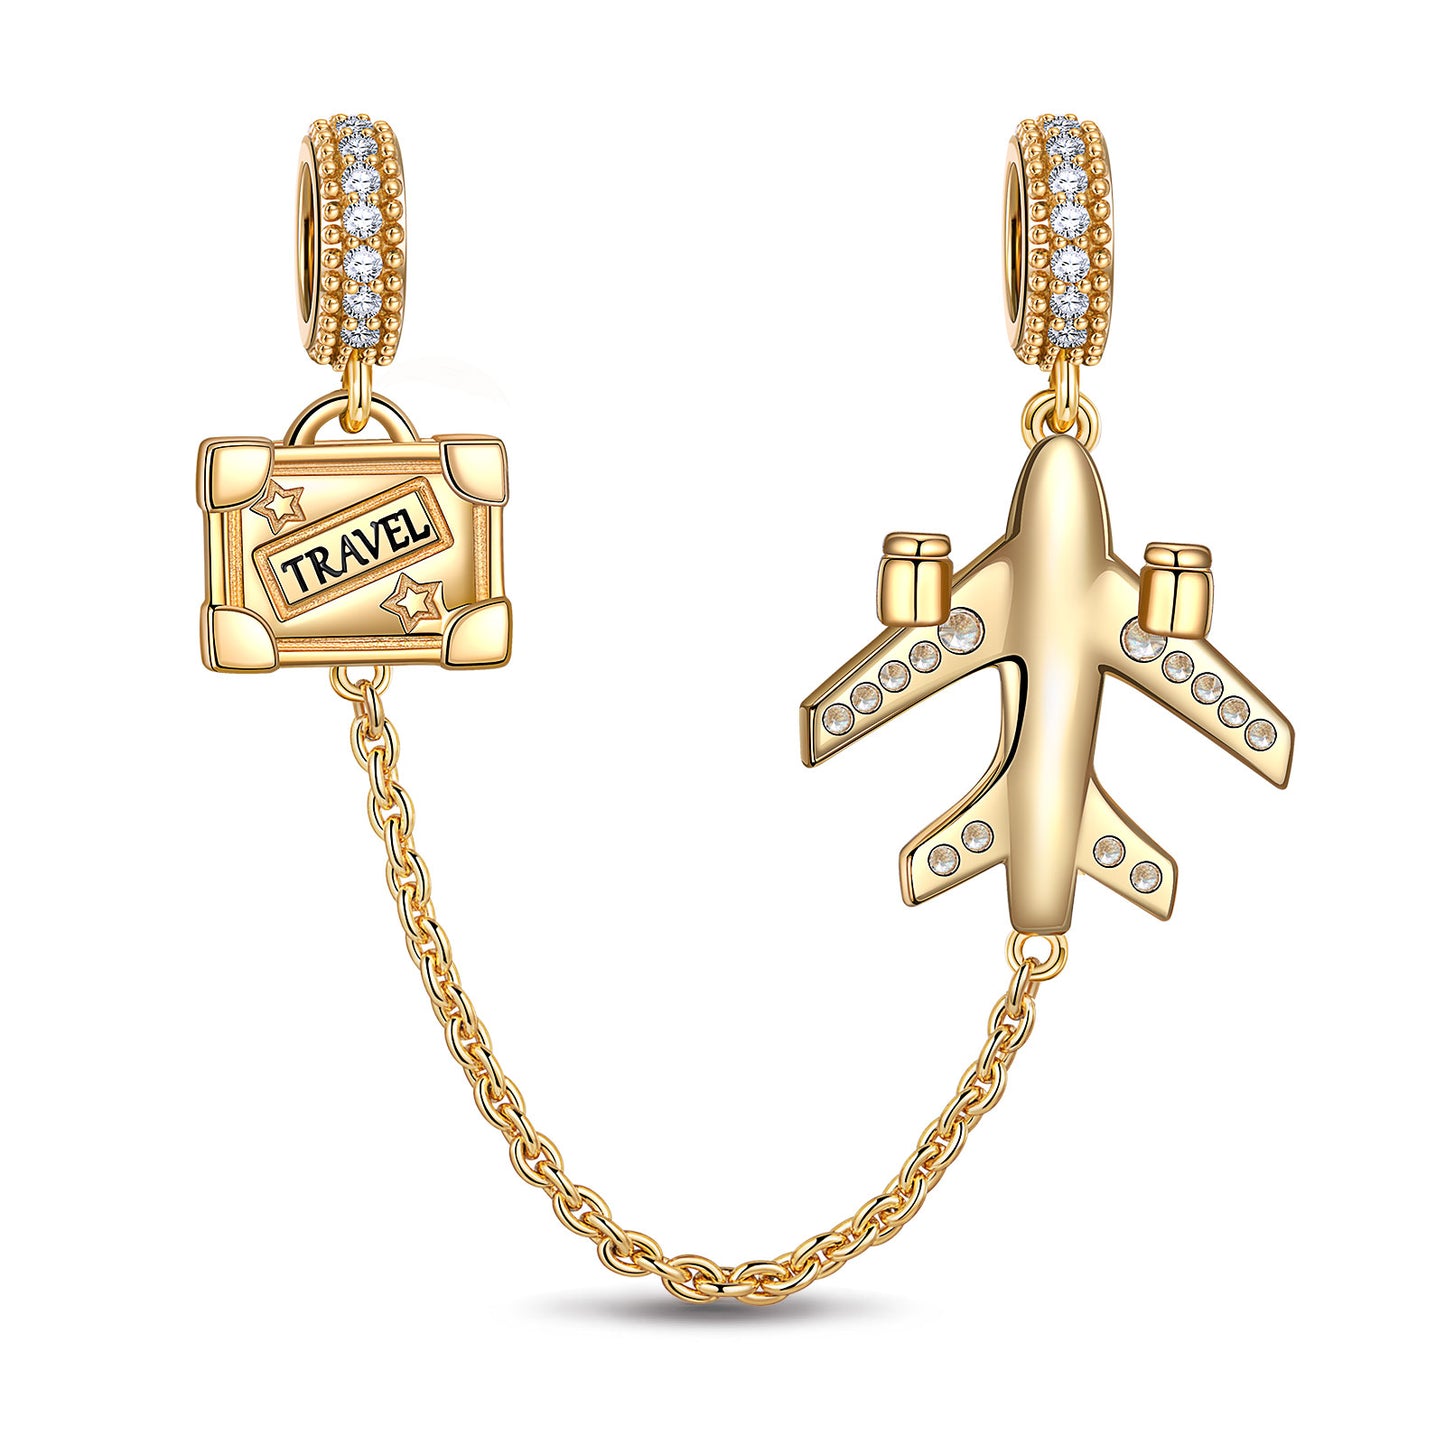 Journey to Love Tarnish-resistant Silver Charms With Enamel In 14K Gold Plated